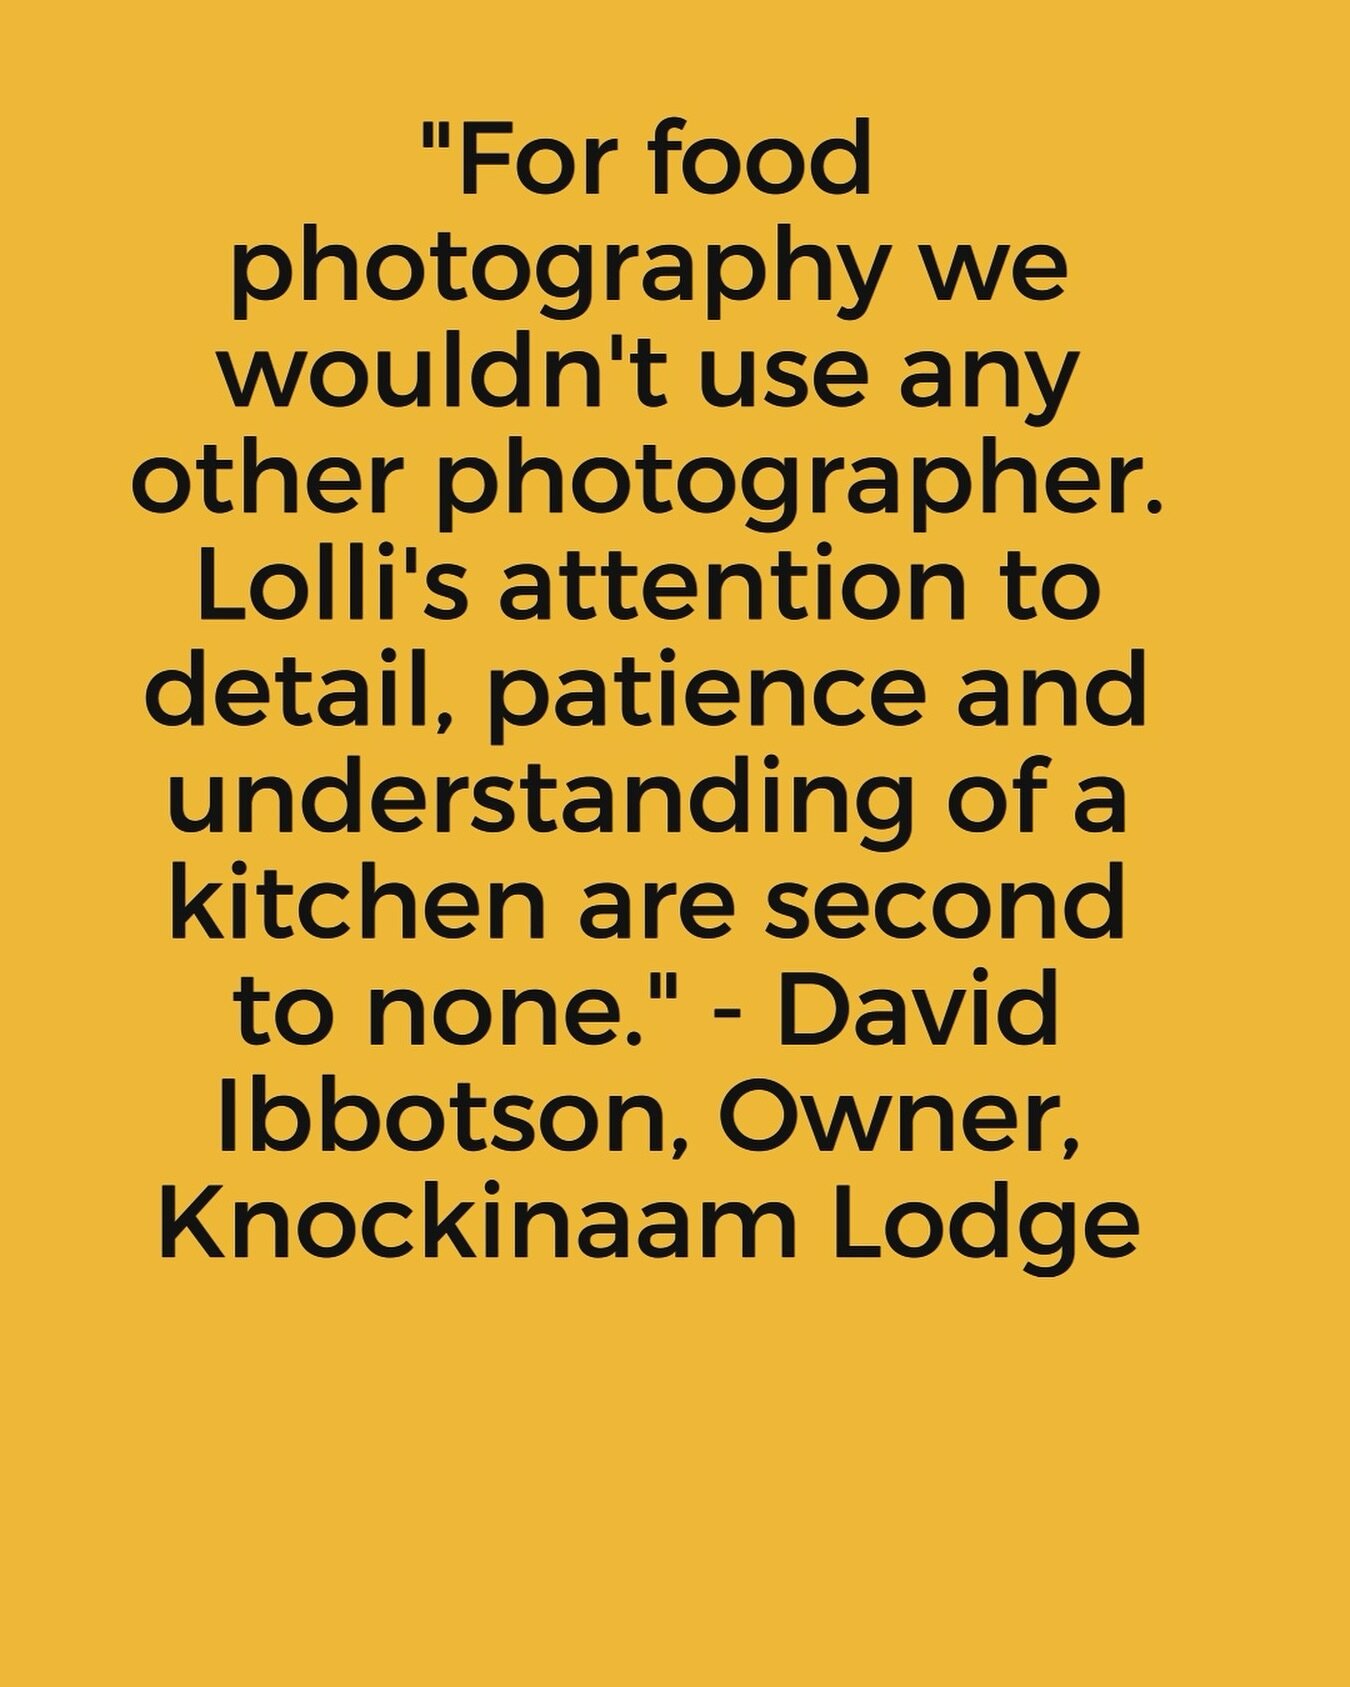 &ldquo;For food photography we wouldn&rsquo;t use any other photographer. Lolli&rsquo;s attention to detail, patience and understanding of a kitchen are second to none.&rdquo; - David Ibbotson, Owner, Knockinaam Lodge 

Thank you, David and Team Knoc